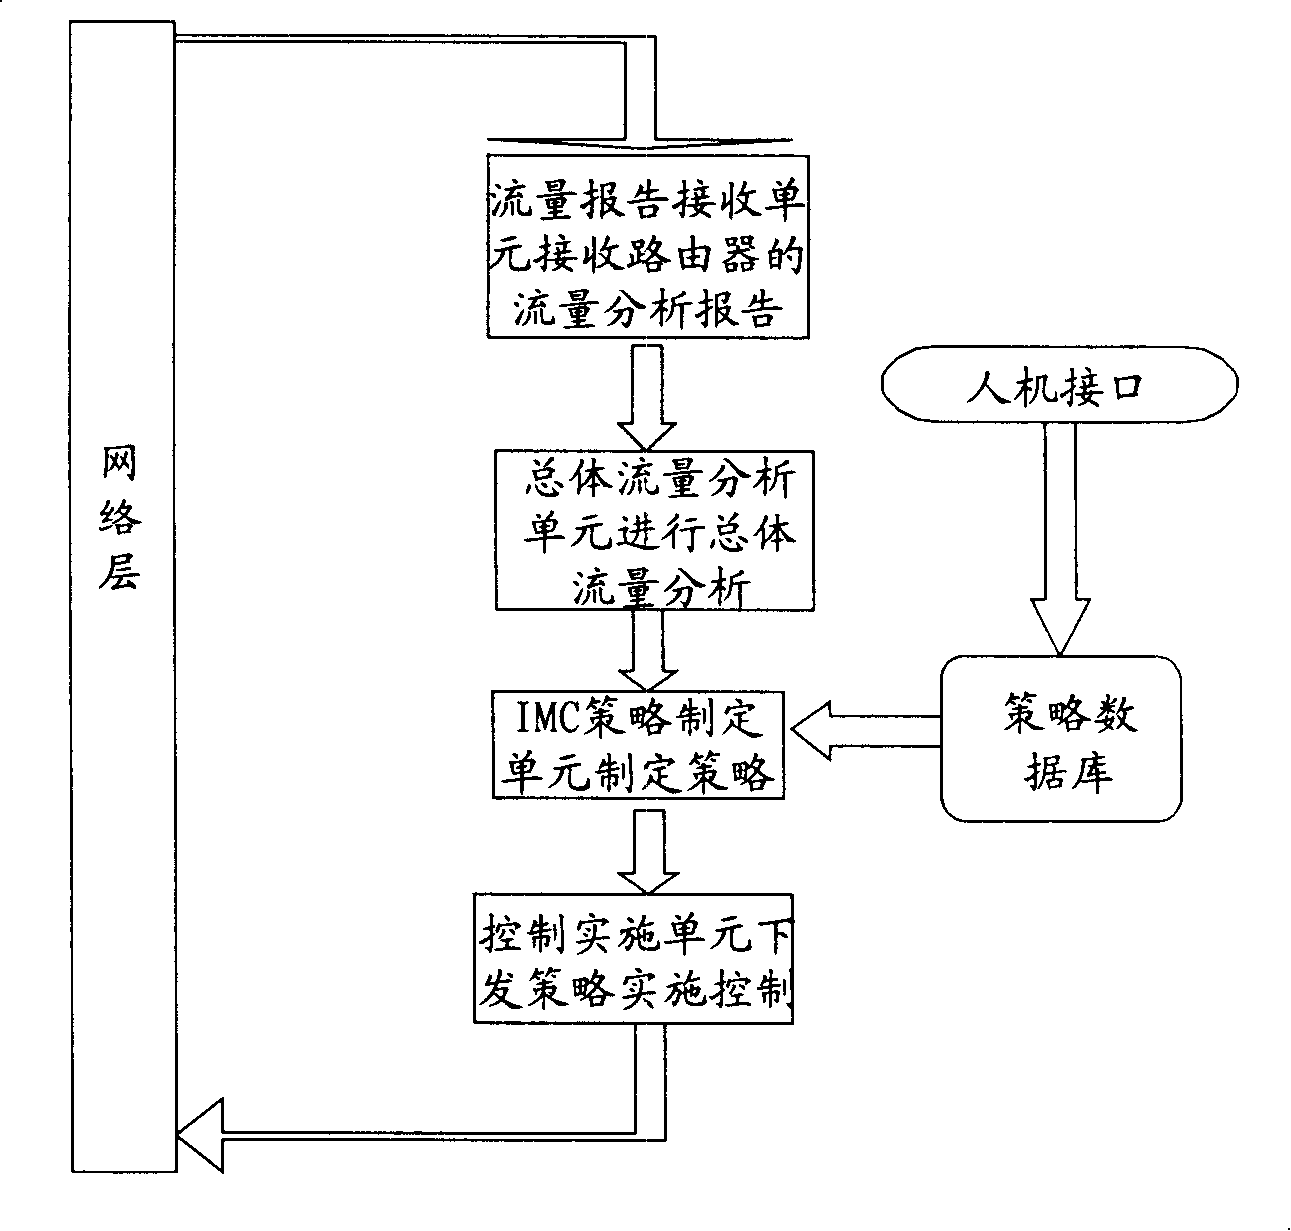 Method, apparatus and system for flow control of point-to-point file sharing